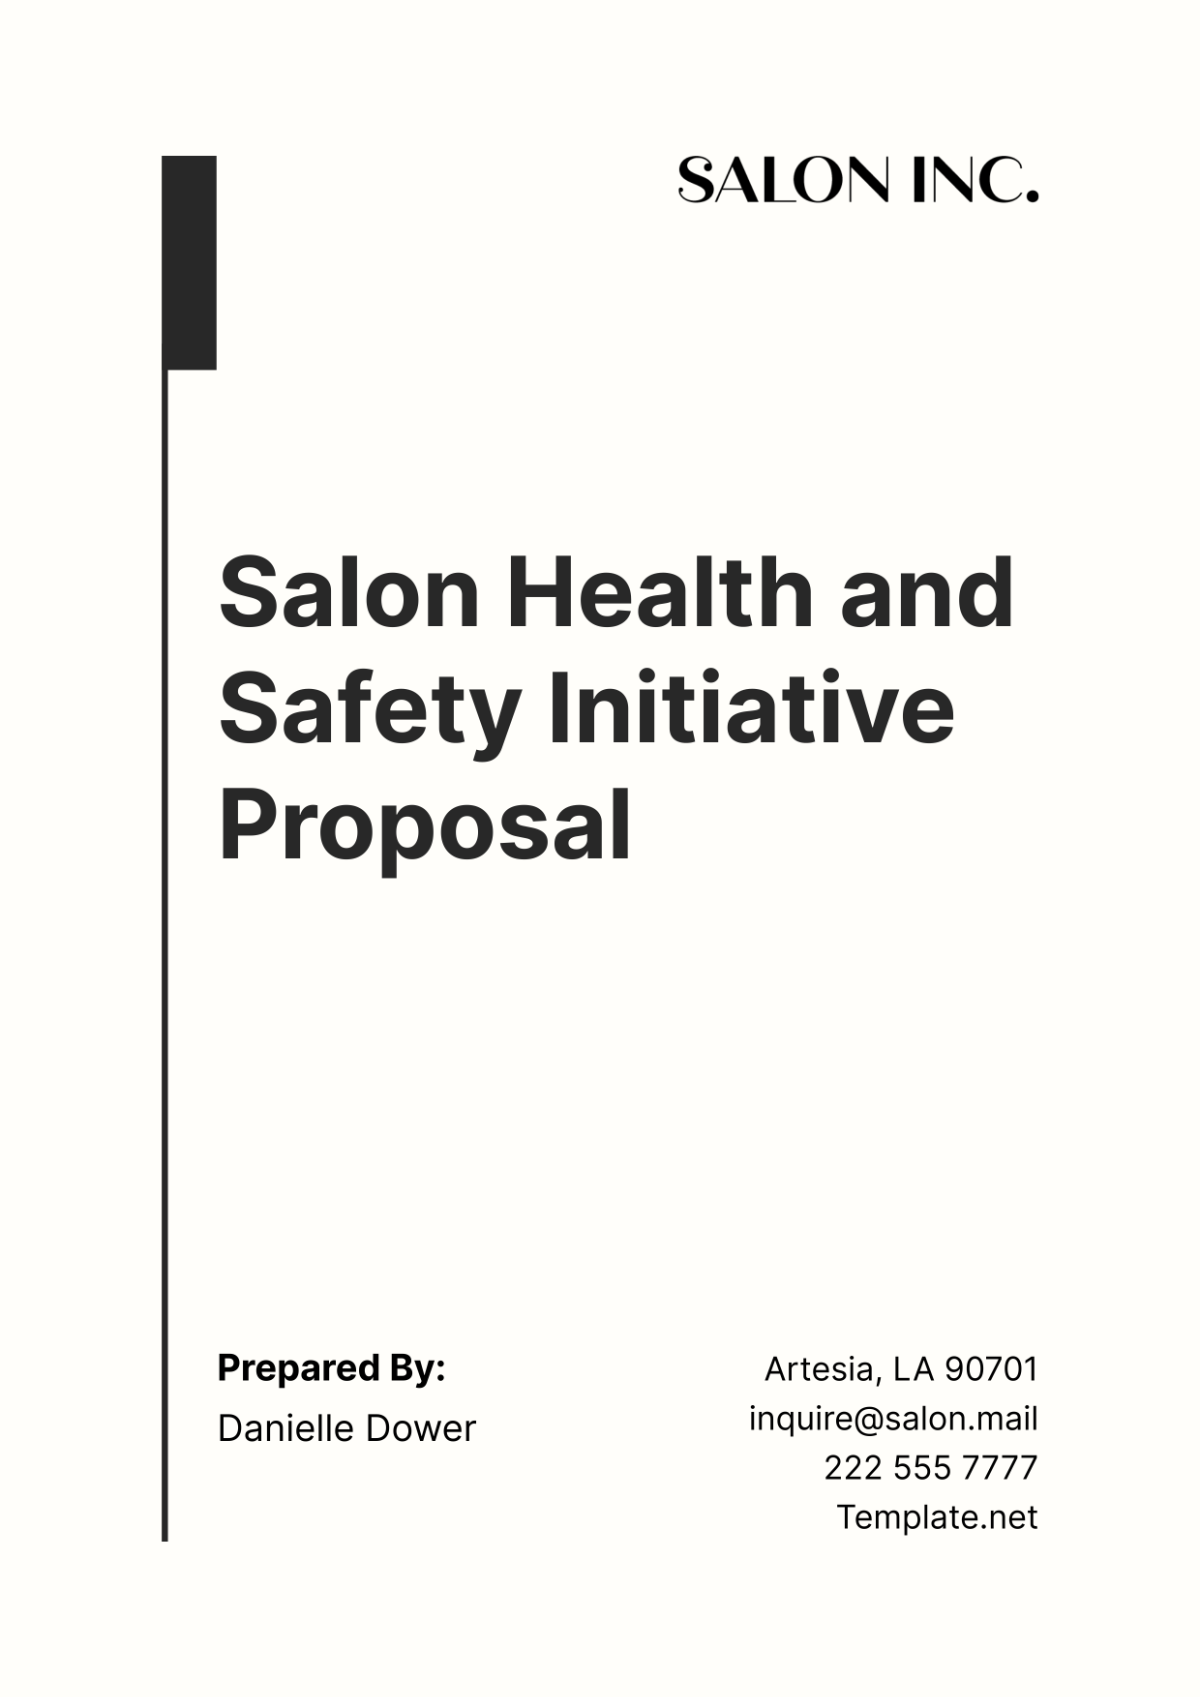 Salon Health and Safety Initiative Proposal Template